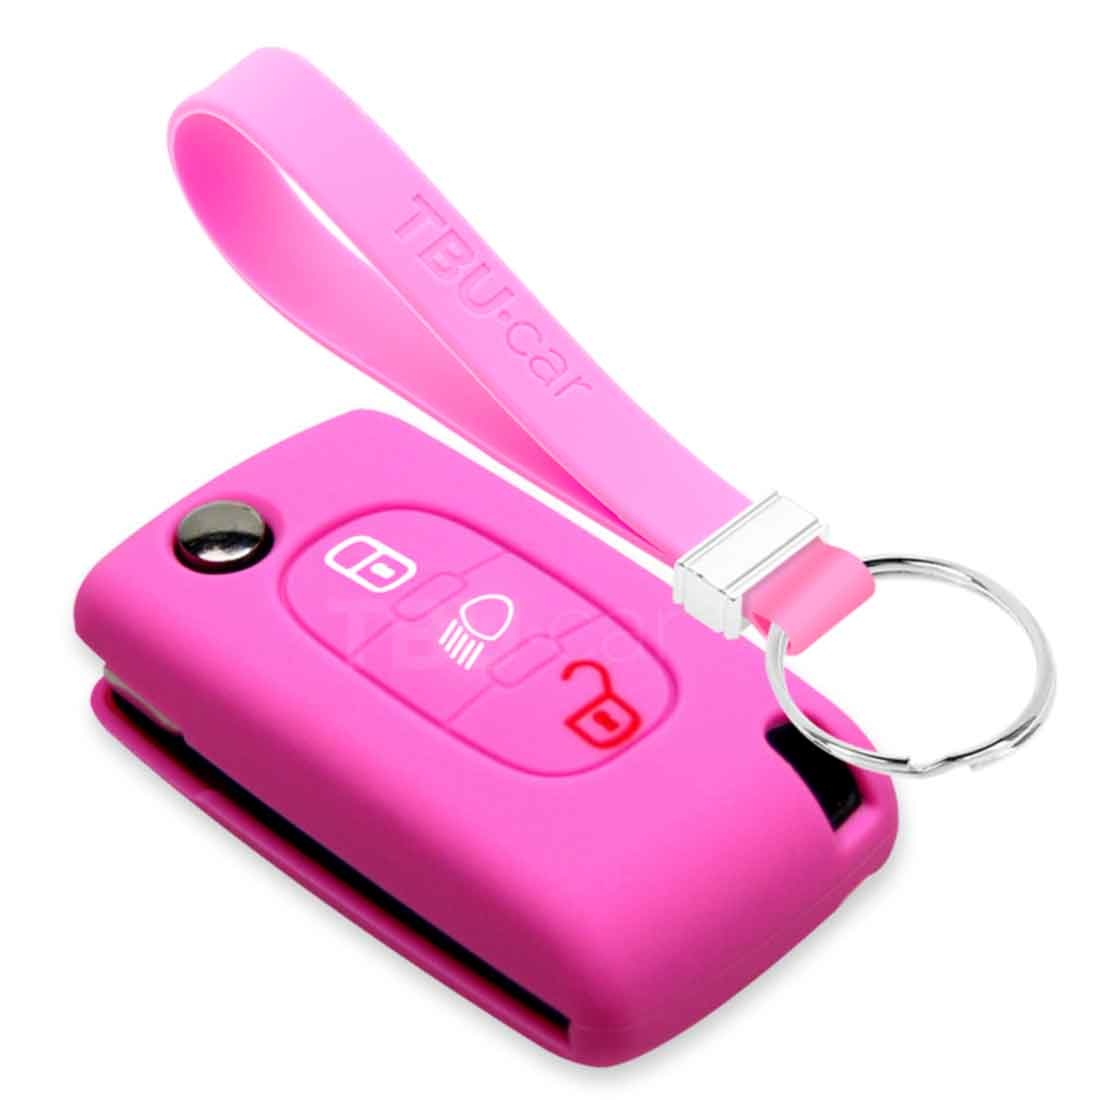 TBU car TBU car Car key cover compatible with Peugeot - Silicone Protective Remote Key Shell - FOB Case Cover - Pink